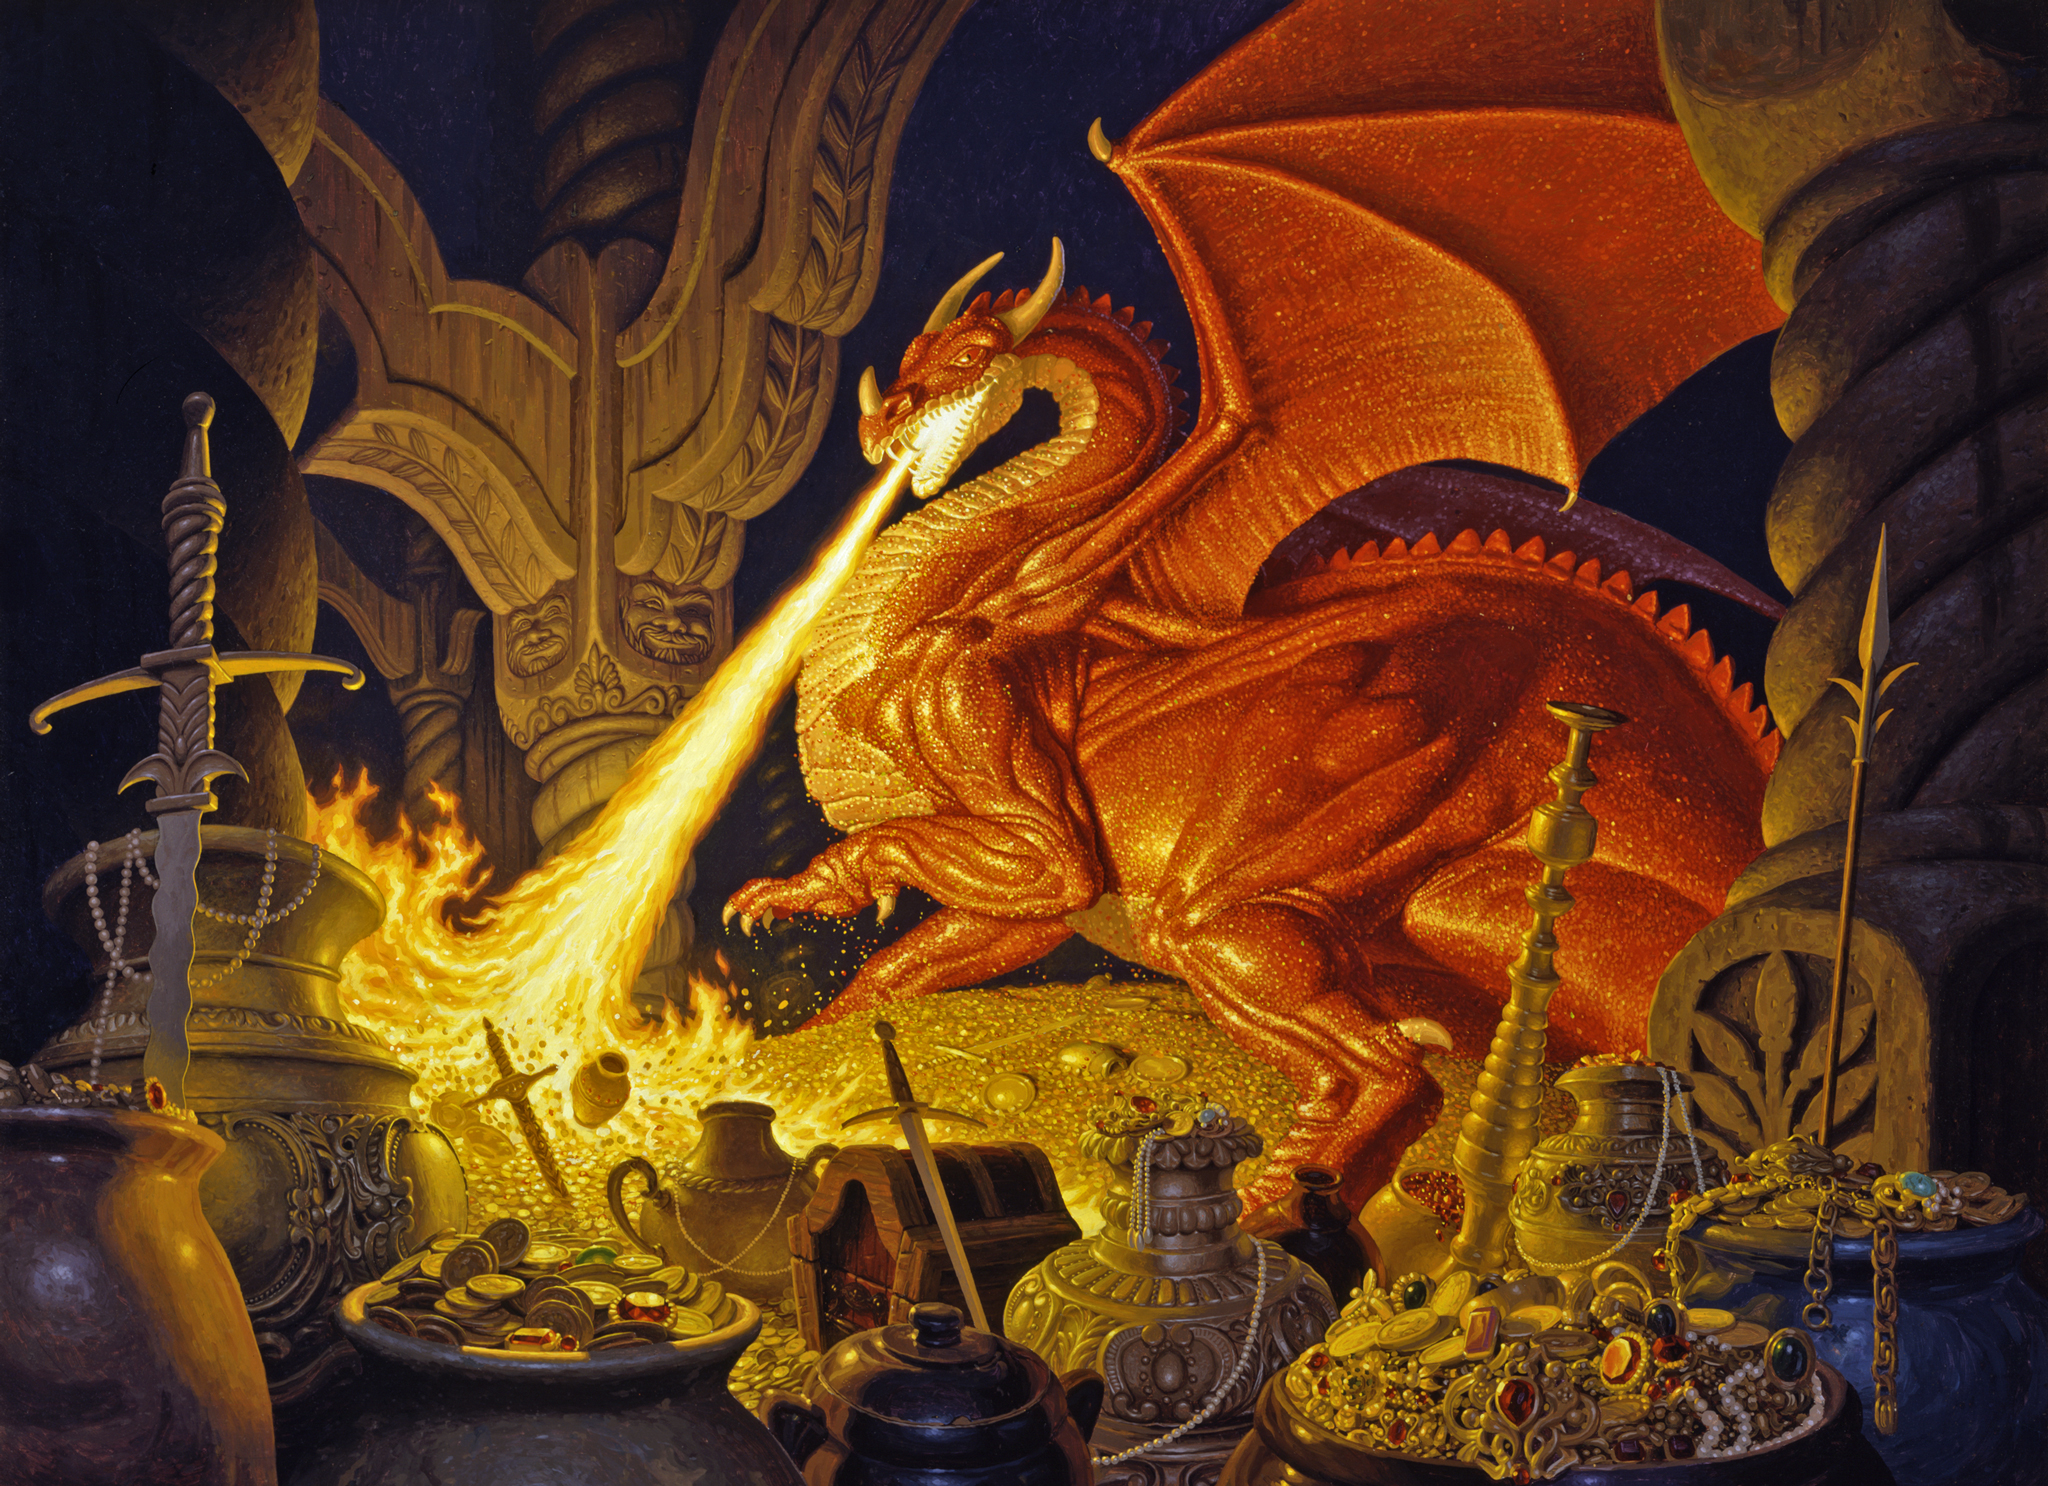 The Science Behind Mythical Dragons